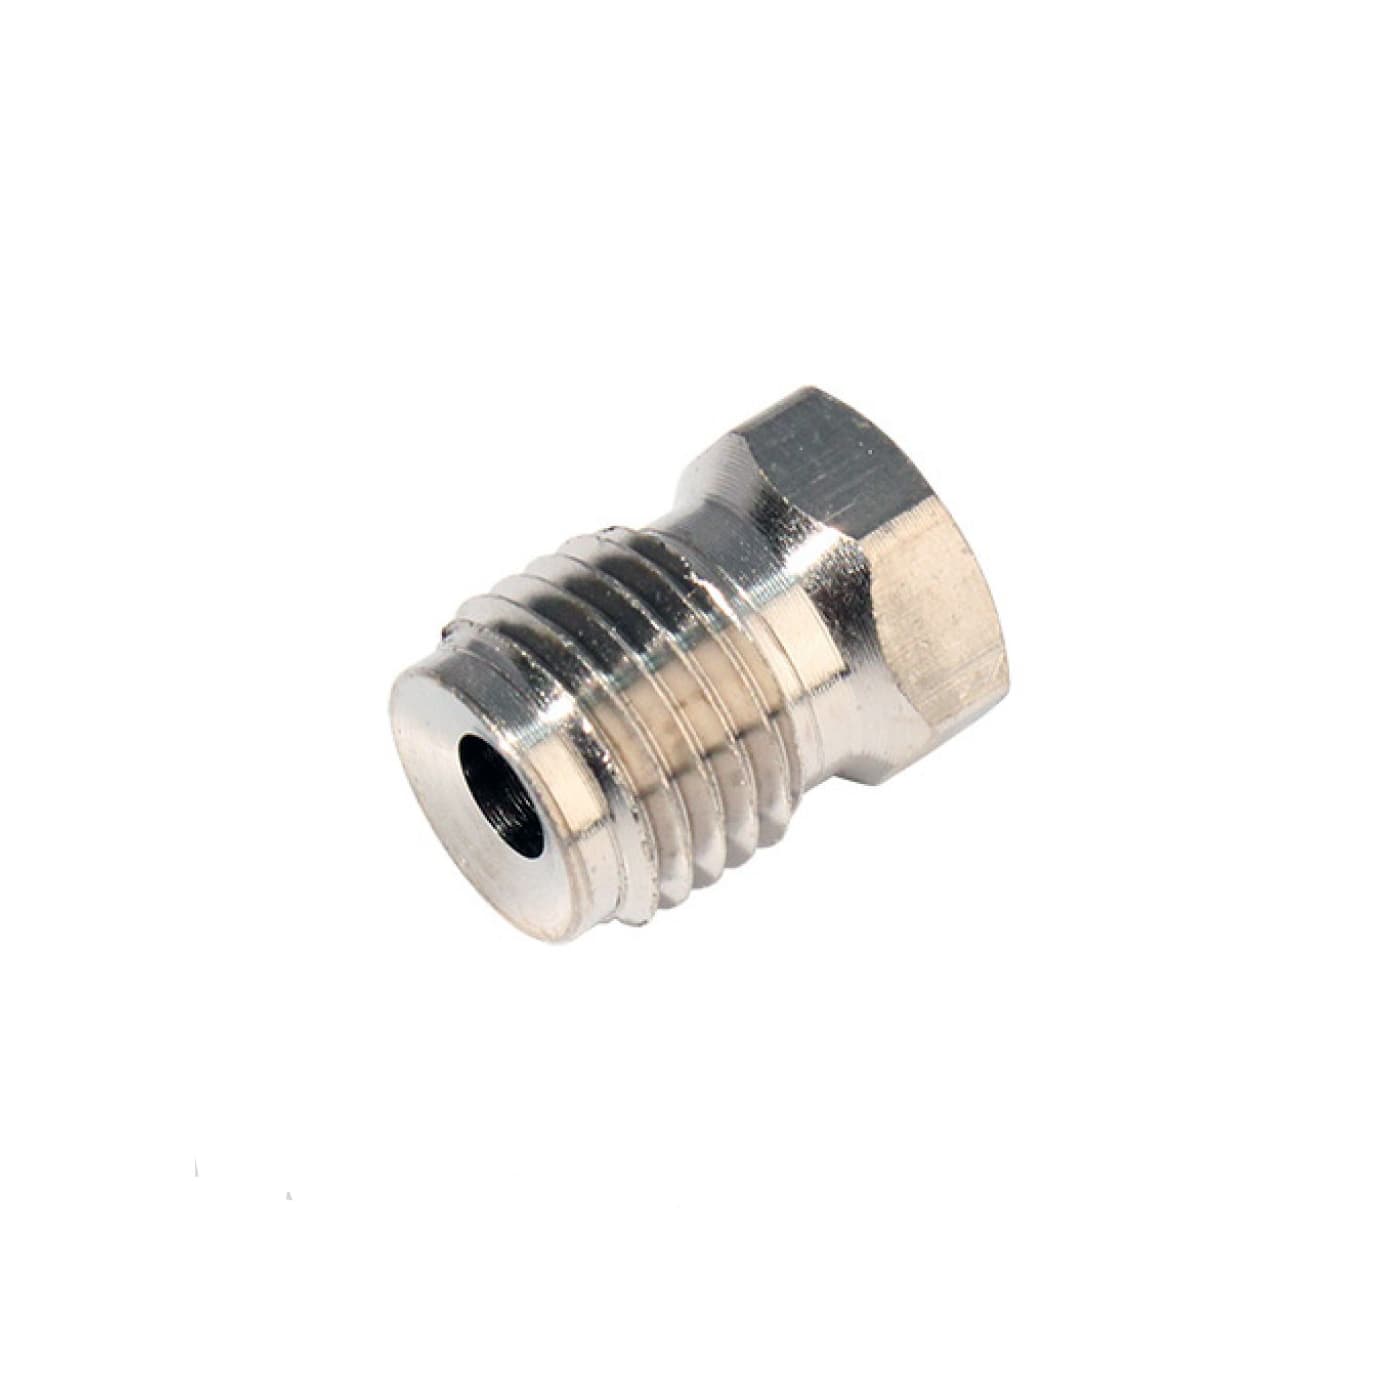 B&G PN-150-2 Stainless Packing Nut-1